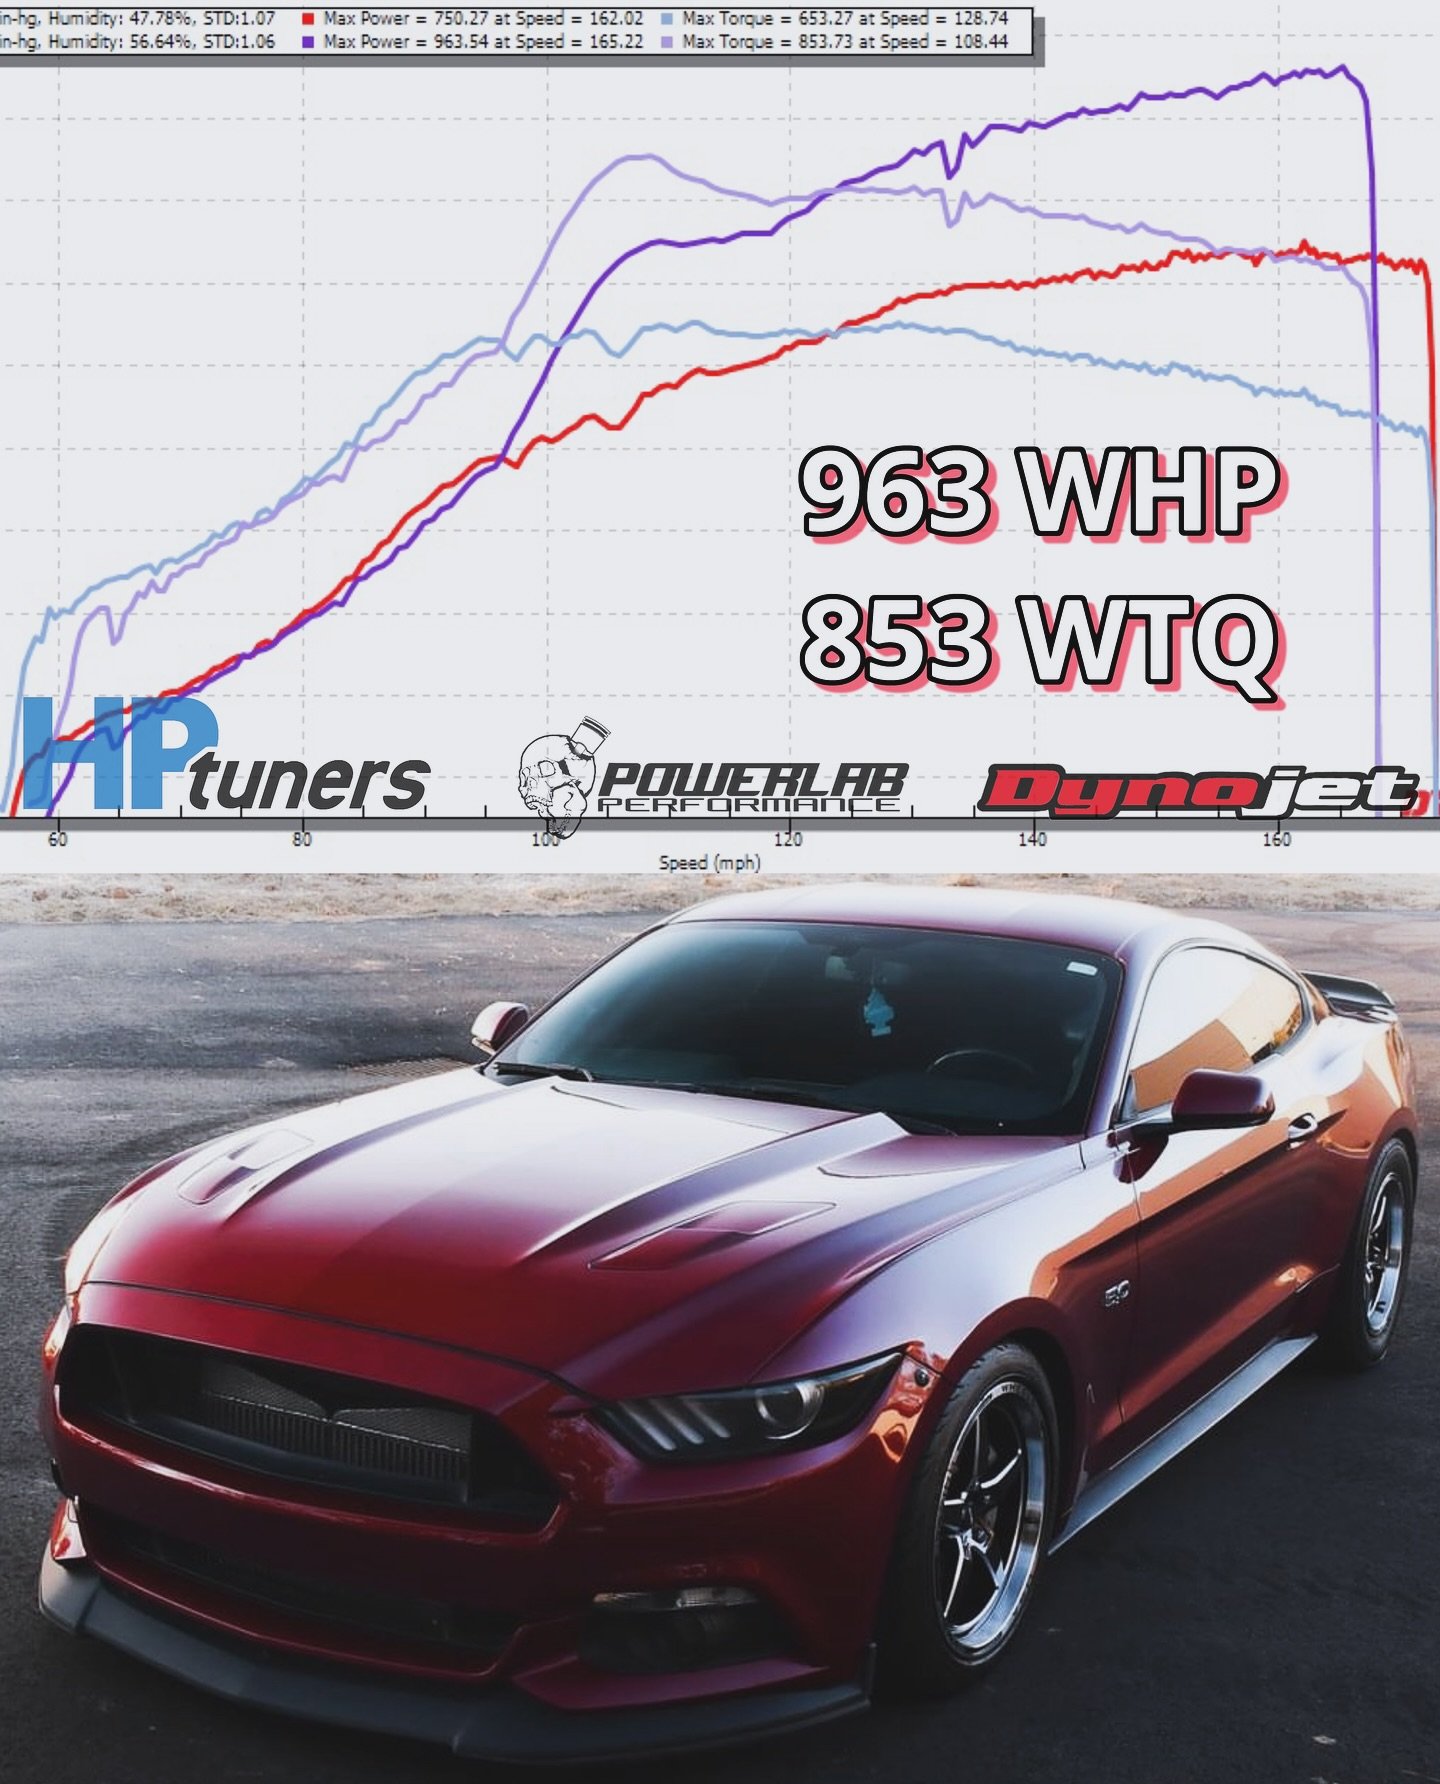 Another 900+ WHP GEN-2 📈
 
This on3 equipped GEN-2 visited for dyno tuning and needless to say, we exceeded expectations on 14 psi and pump E85.
 
750 WHP / 653 WTQ - 9 PSI 📈
963 WHP / 853 WTQ - 14 PSI 📈
 
A shop is only as good as their knowledge